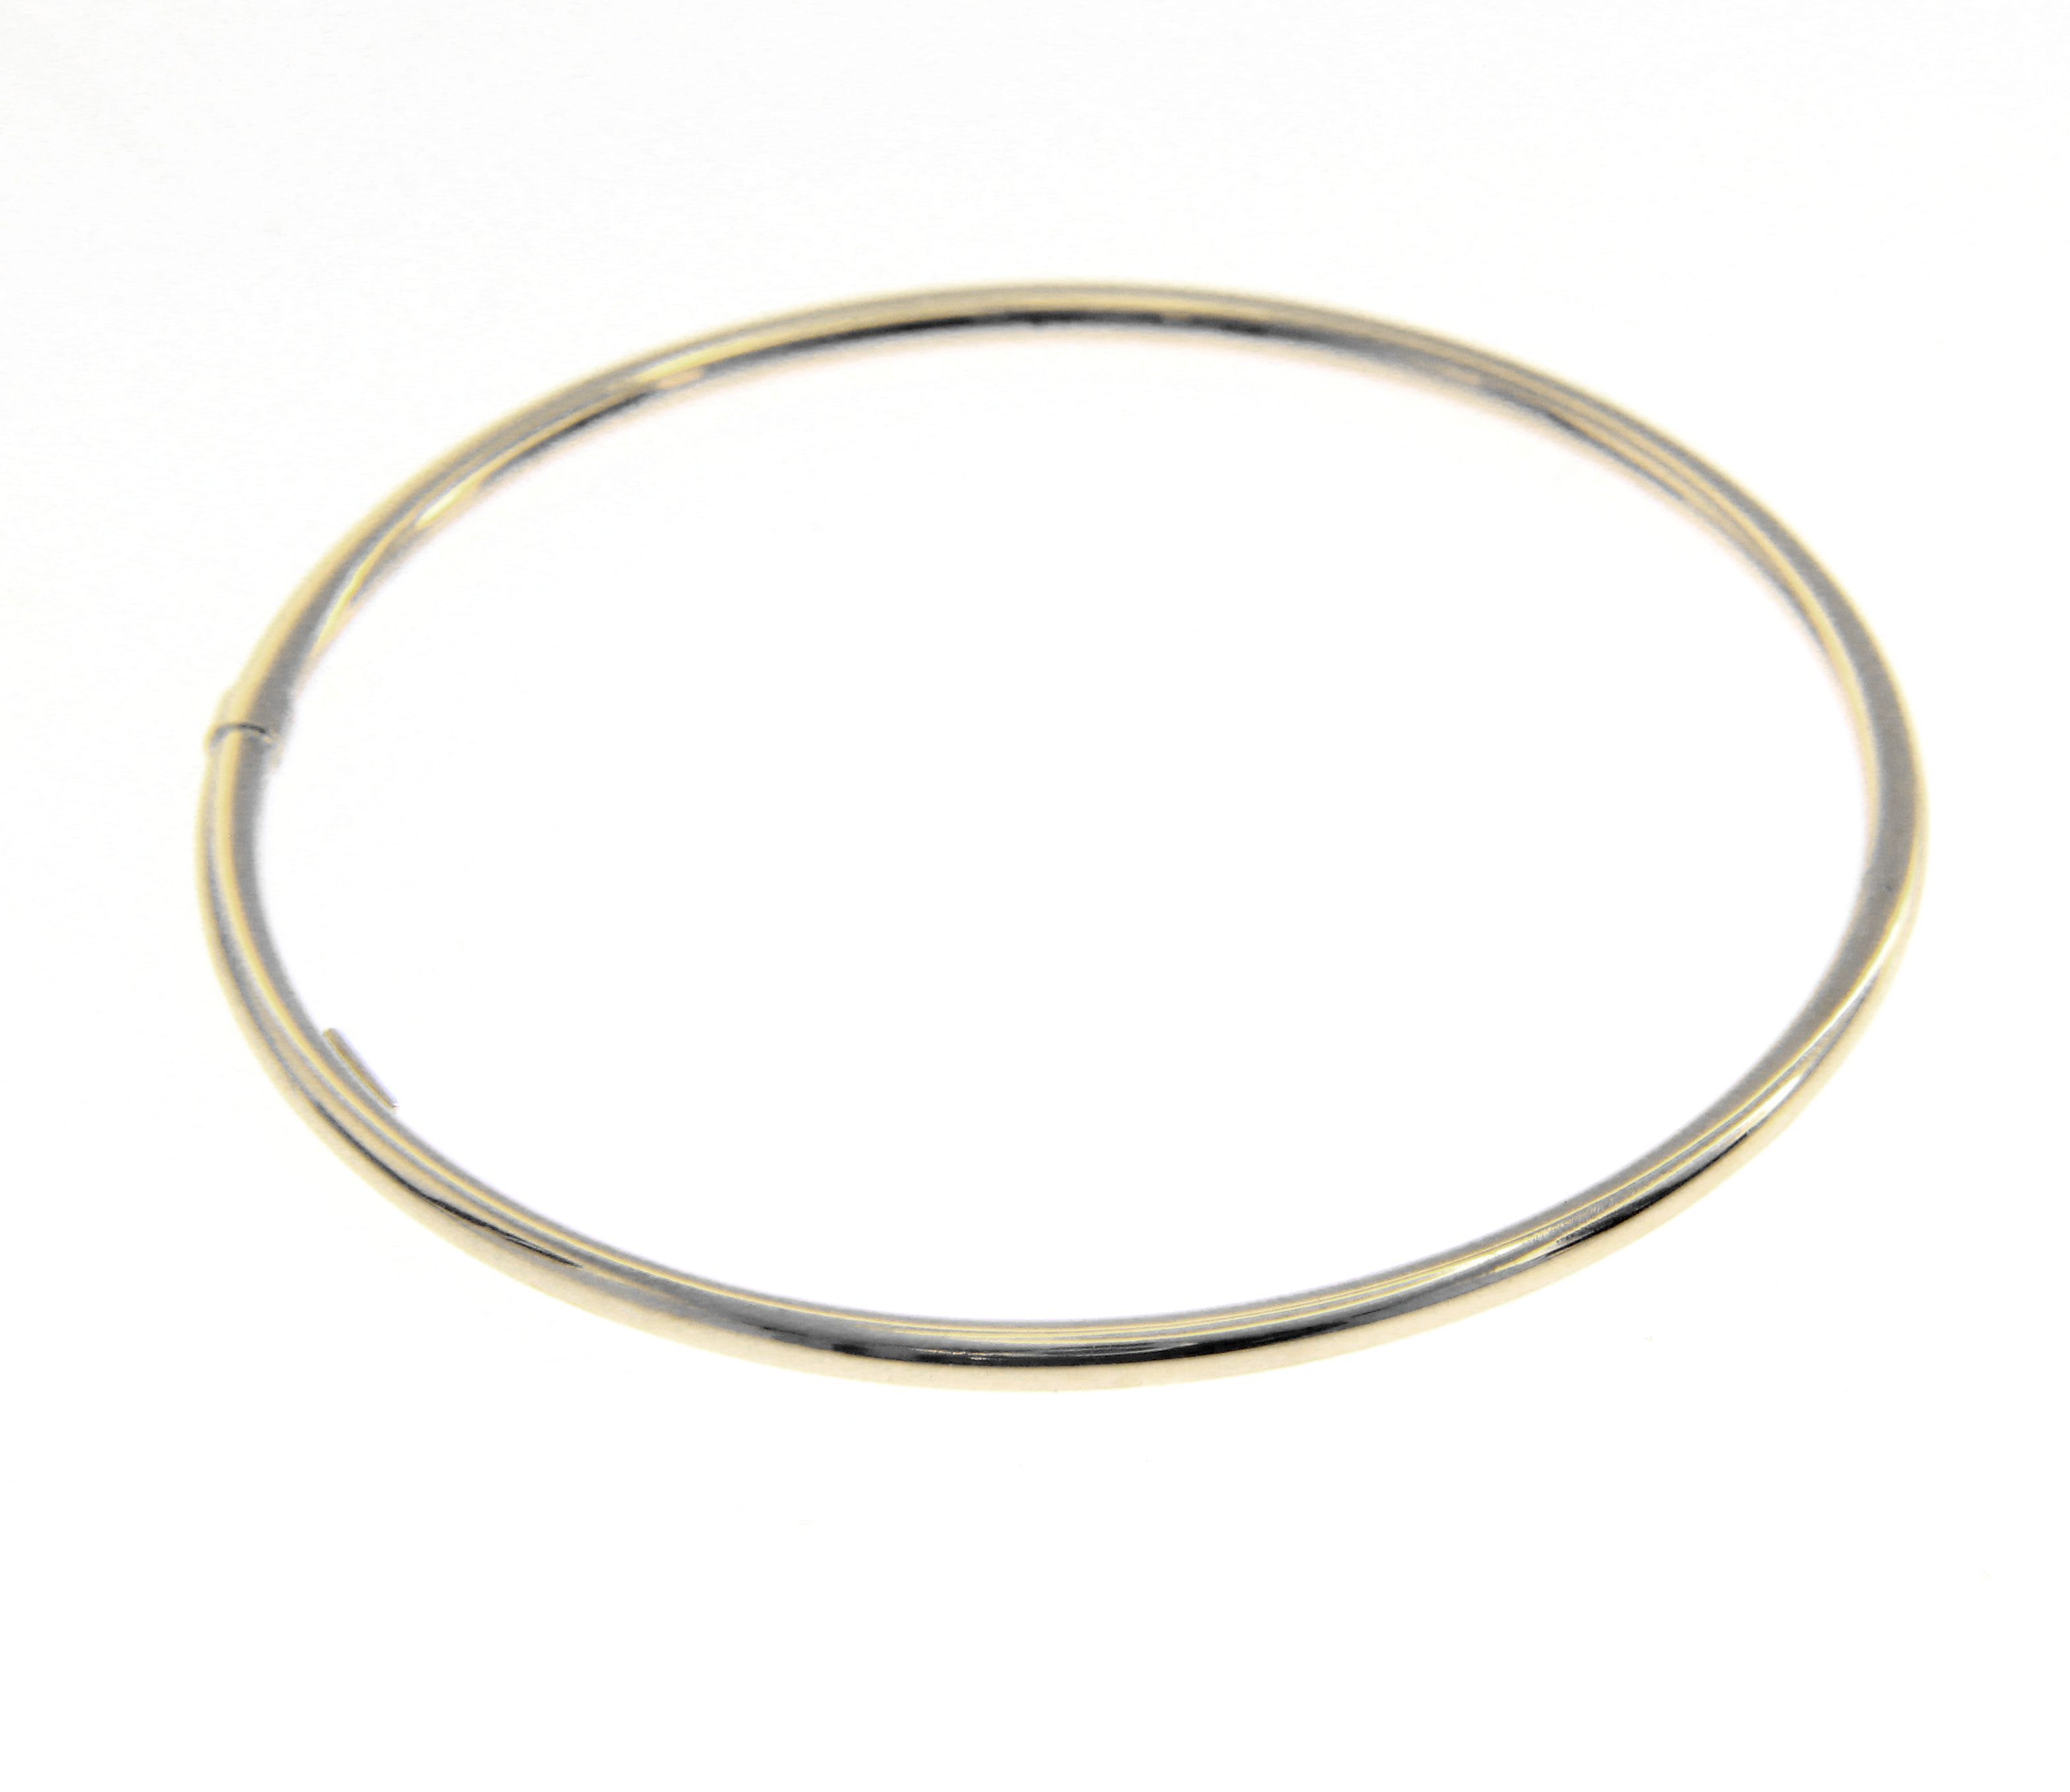 White gold oval bracelet with clasp k14 (code S201306)